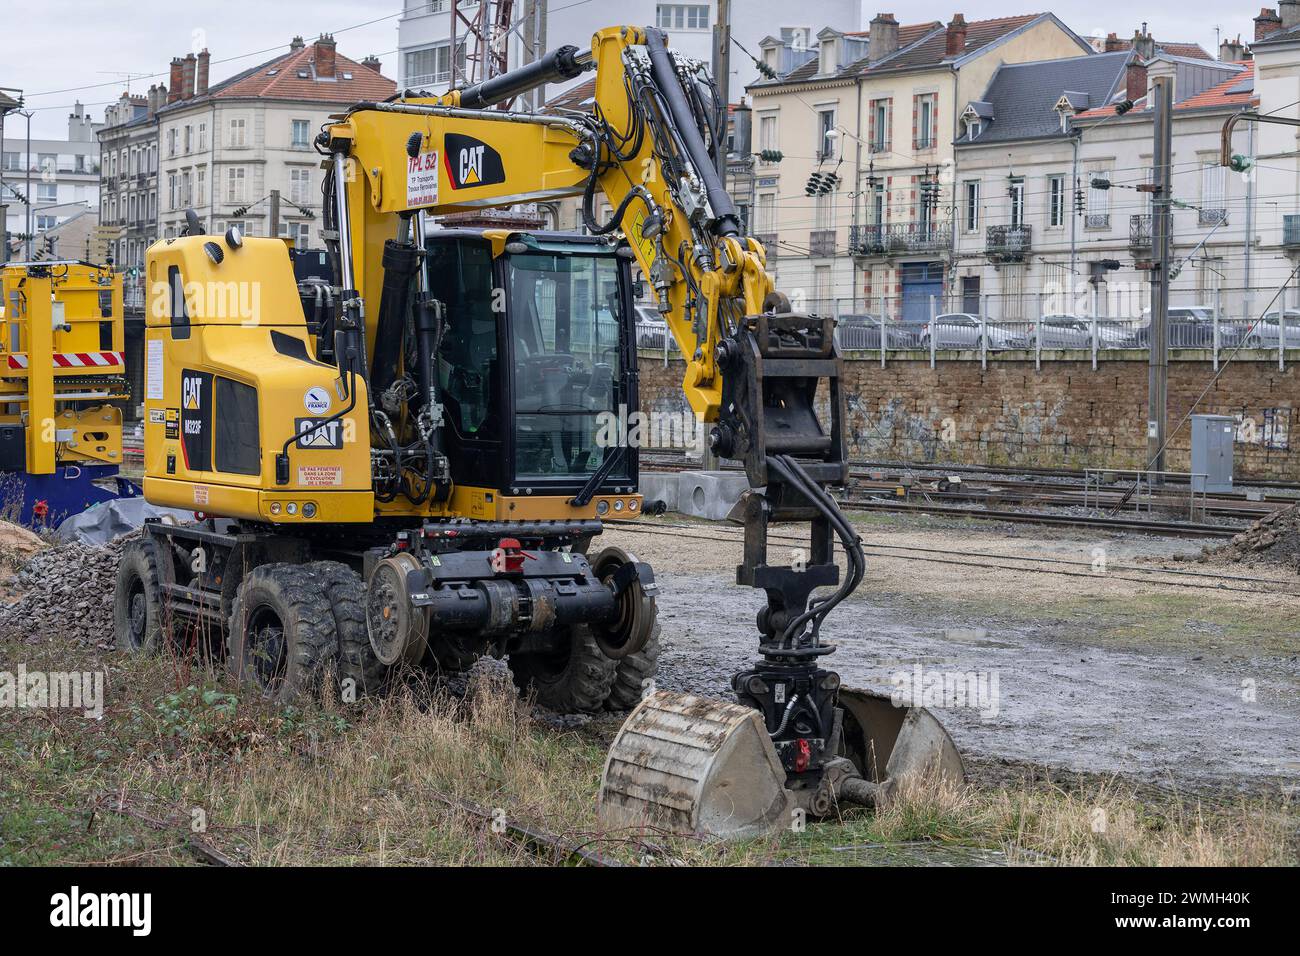 Nancy, France - Focus on a yellow road-rail wheeled excavator CAT M323F on construction site for the renovation of a railway line. Stock Photo